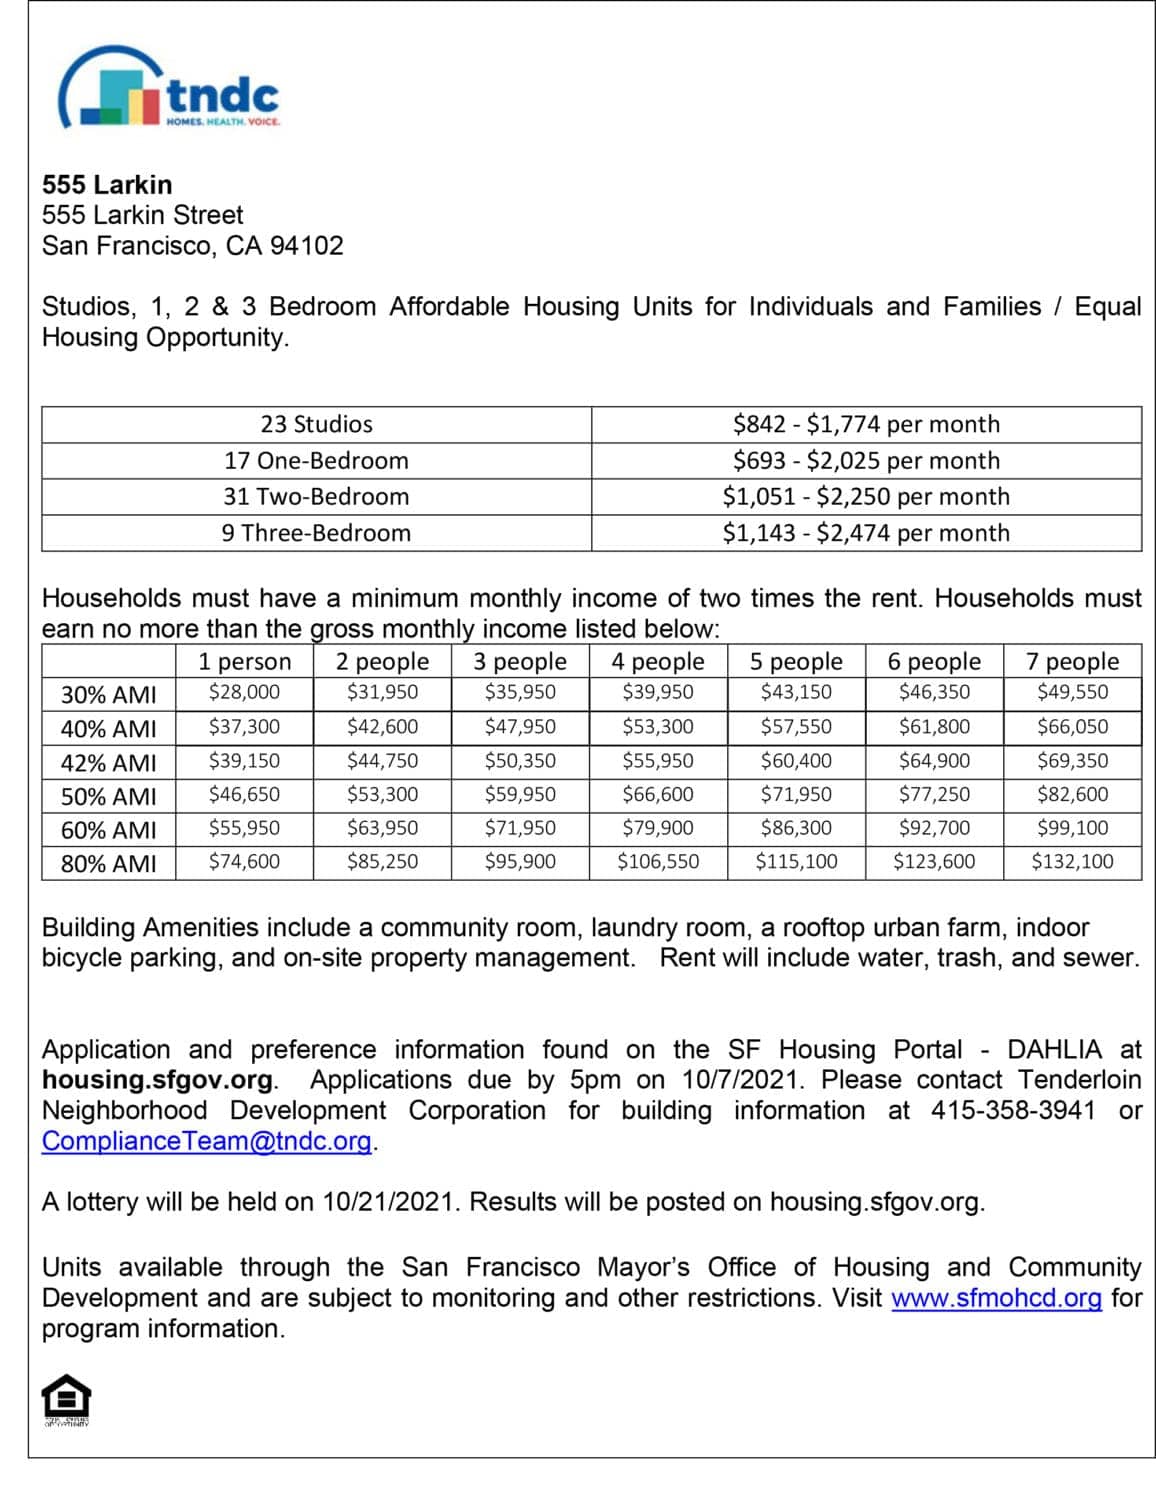 TNDC-0921, TNDC offers 80 affordable apartments, studios to 3-bedrooms - apply by Oct. 7, Affordable Housing 